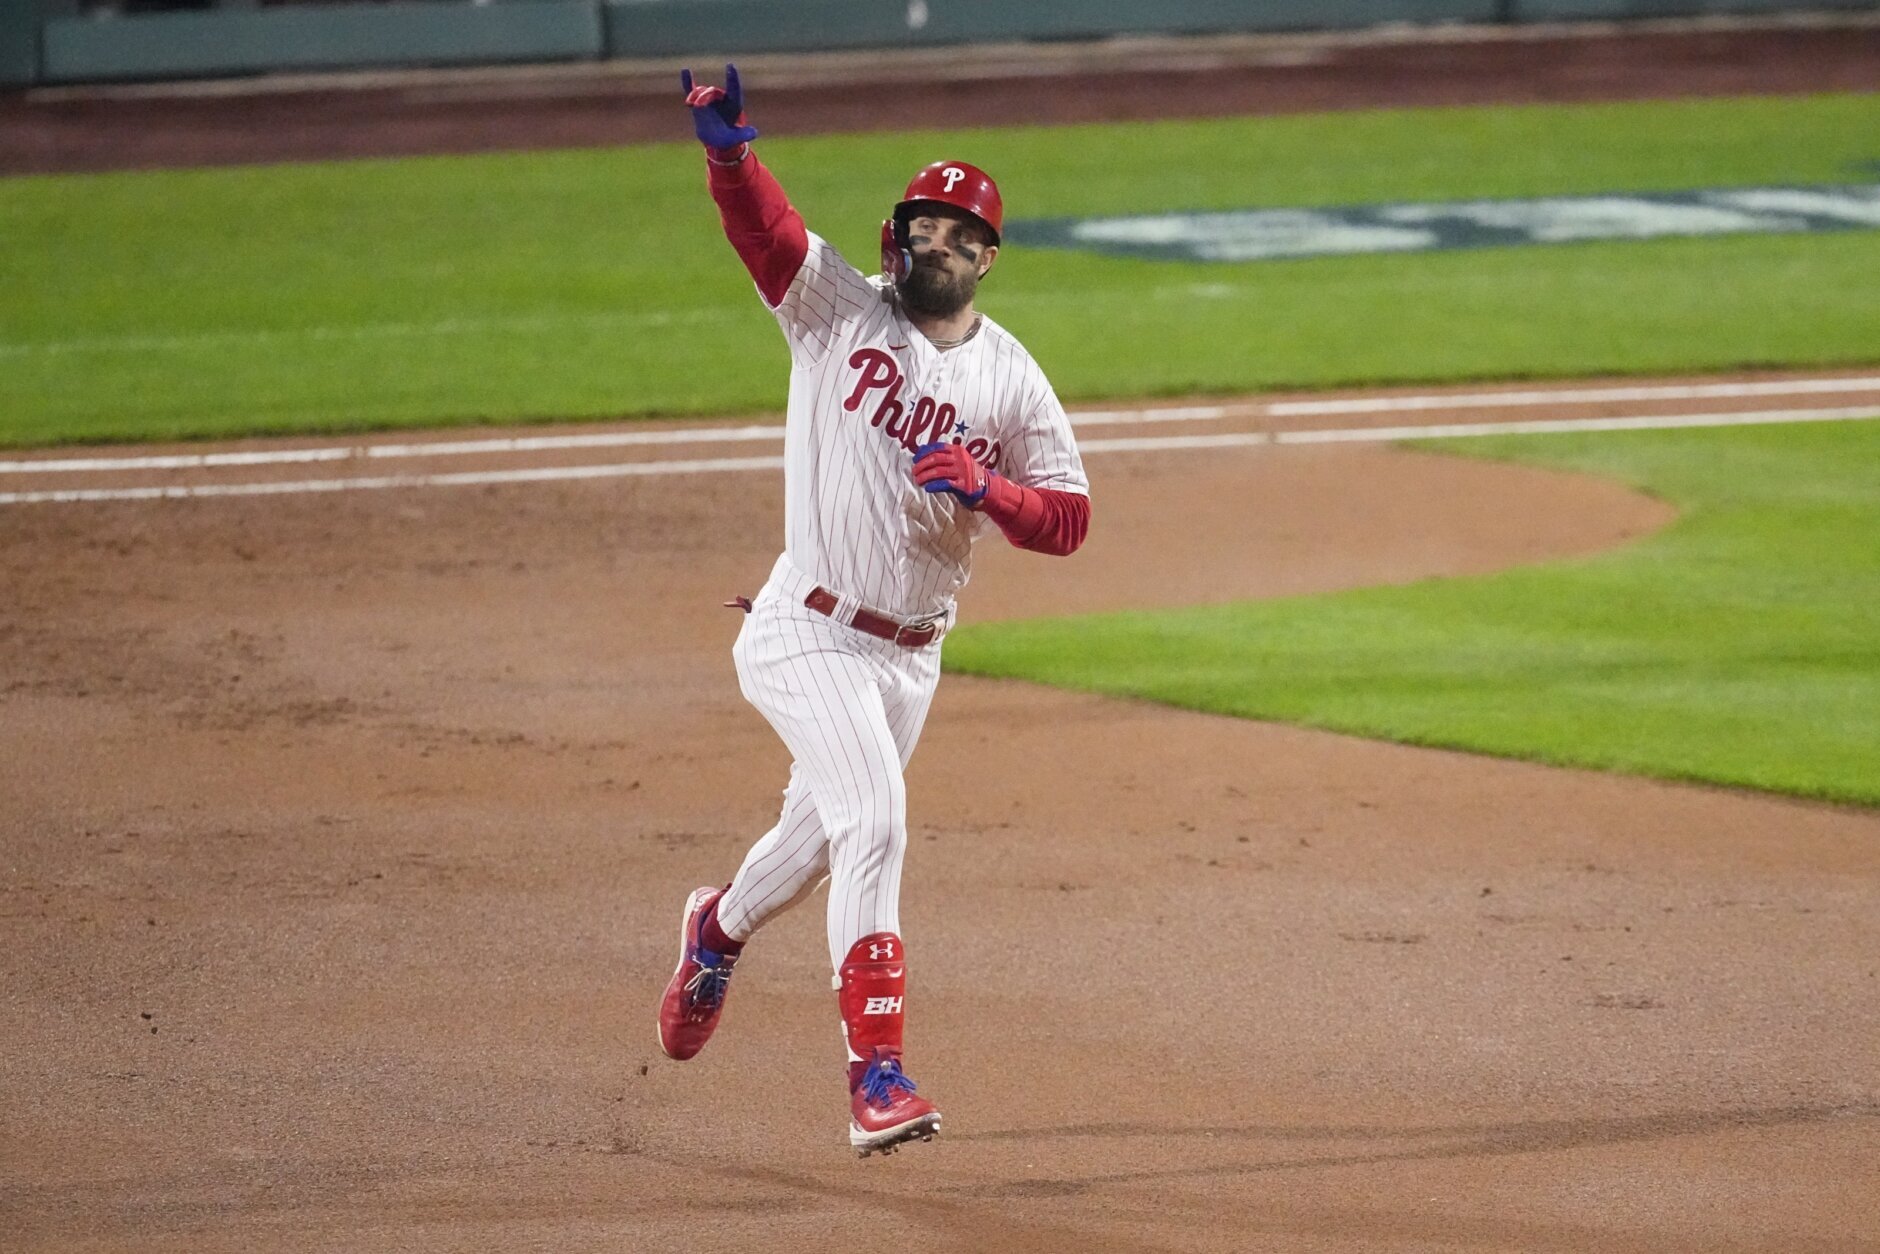 Harper, Phillies tie World Series mark with 5 HR, top Astros – The